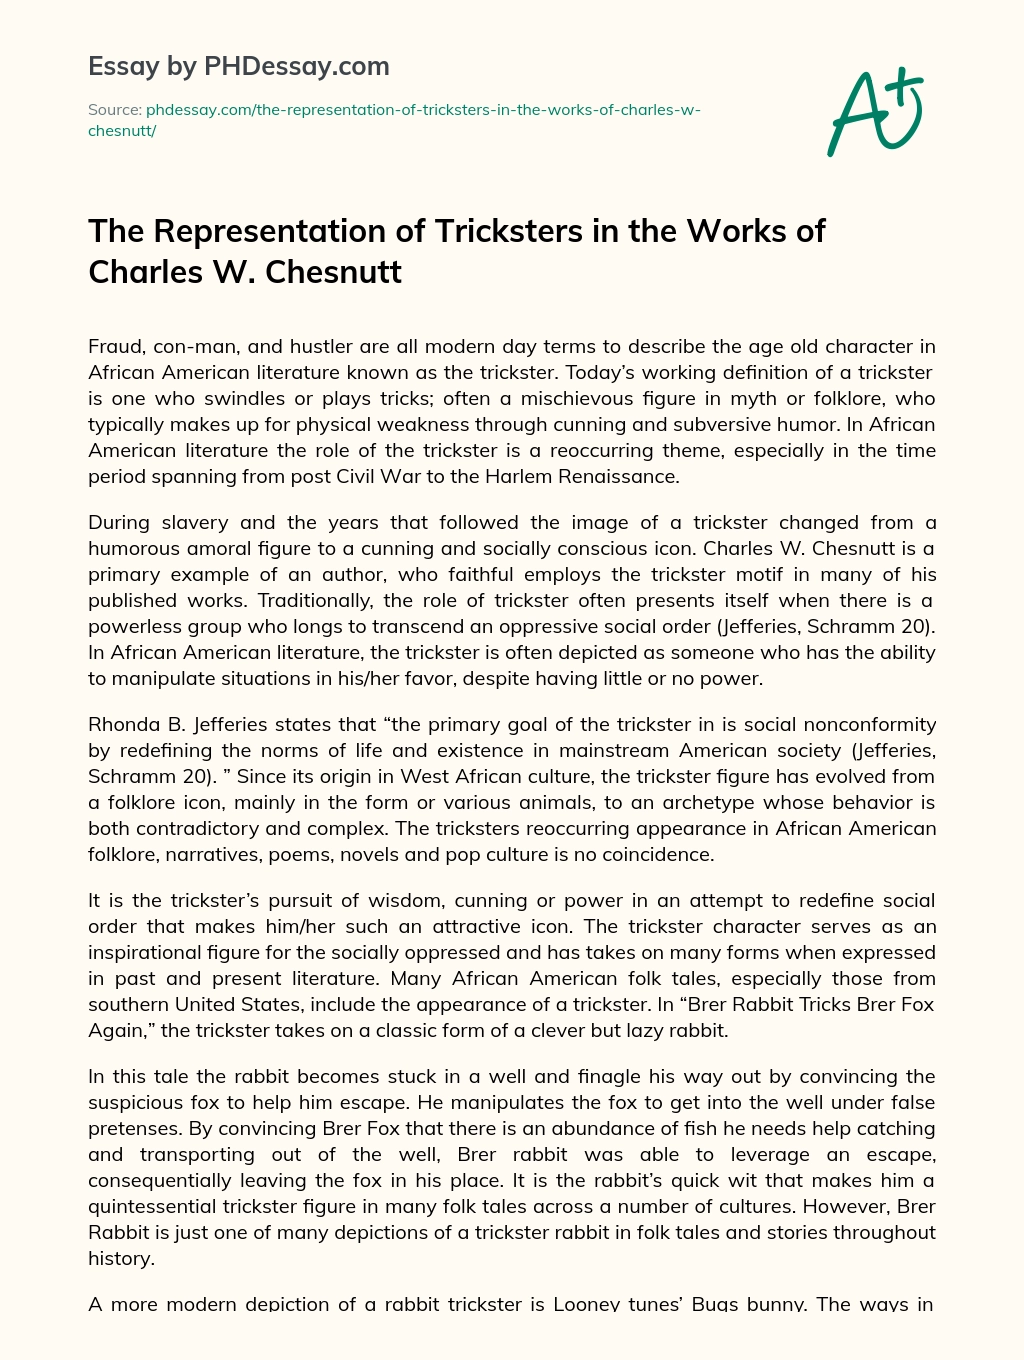 The Representation of Tricksters in the Works of Charles W. Chesnutt essay